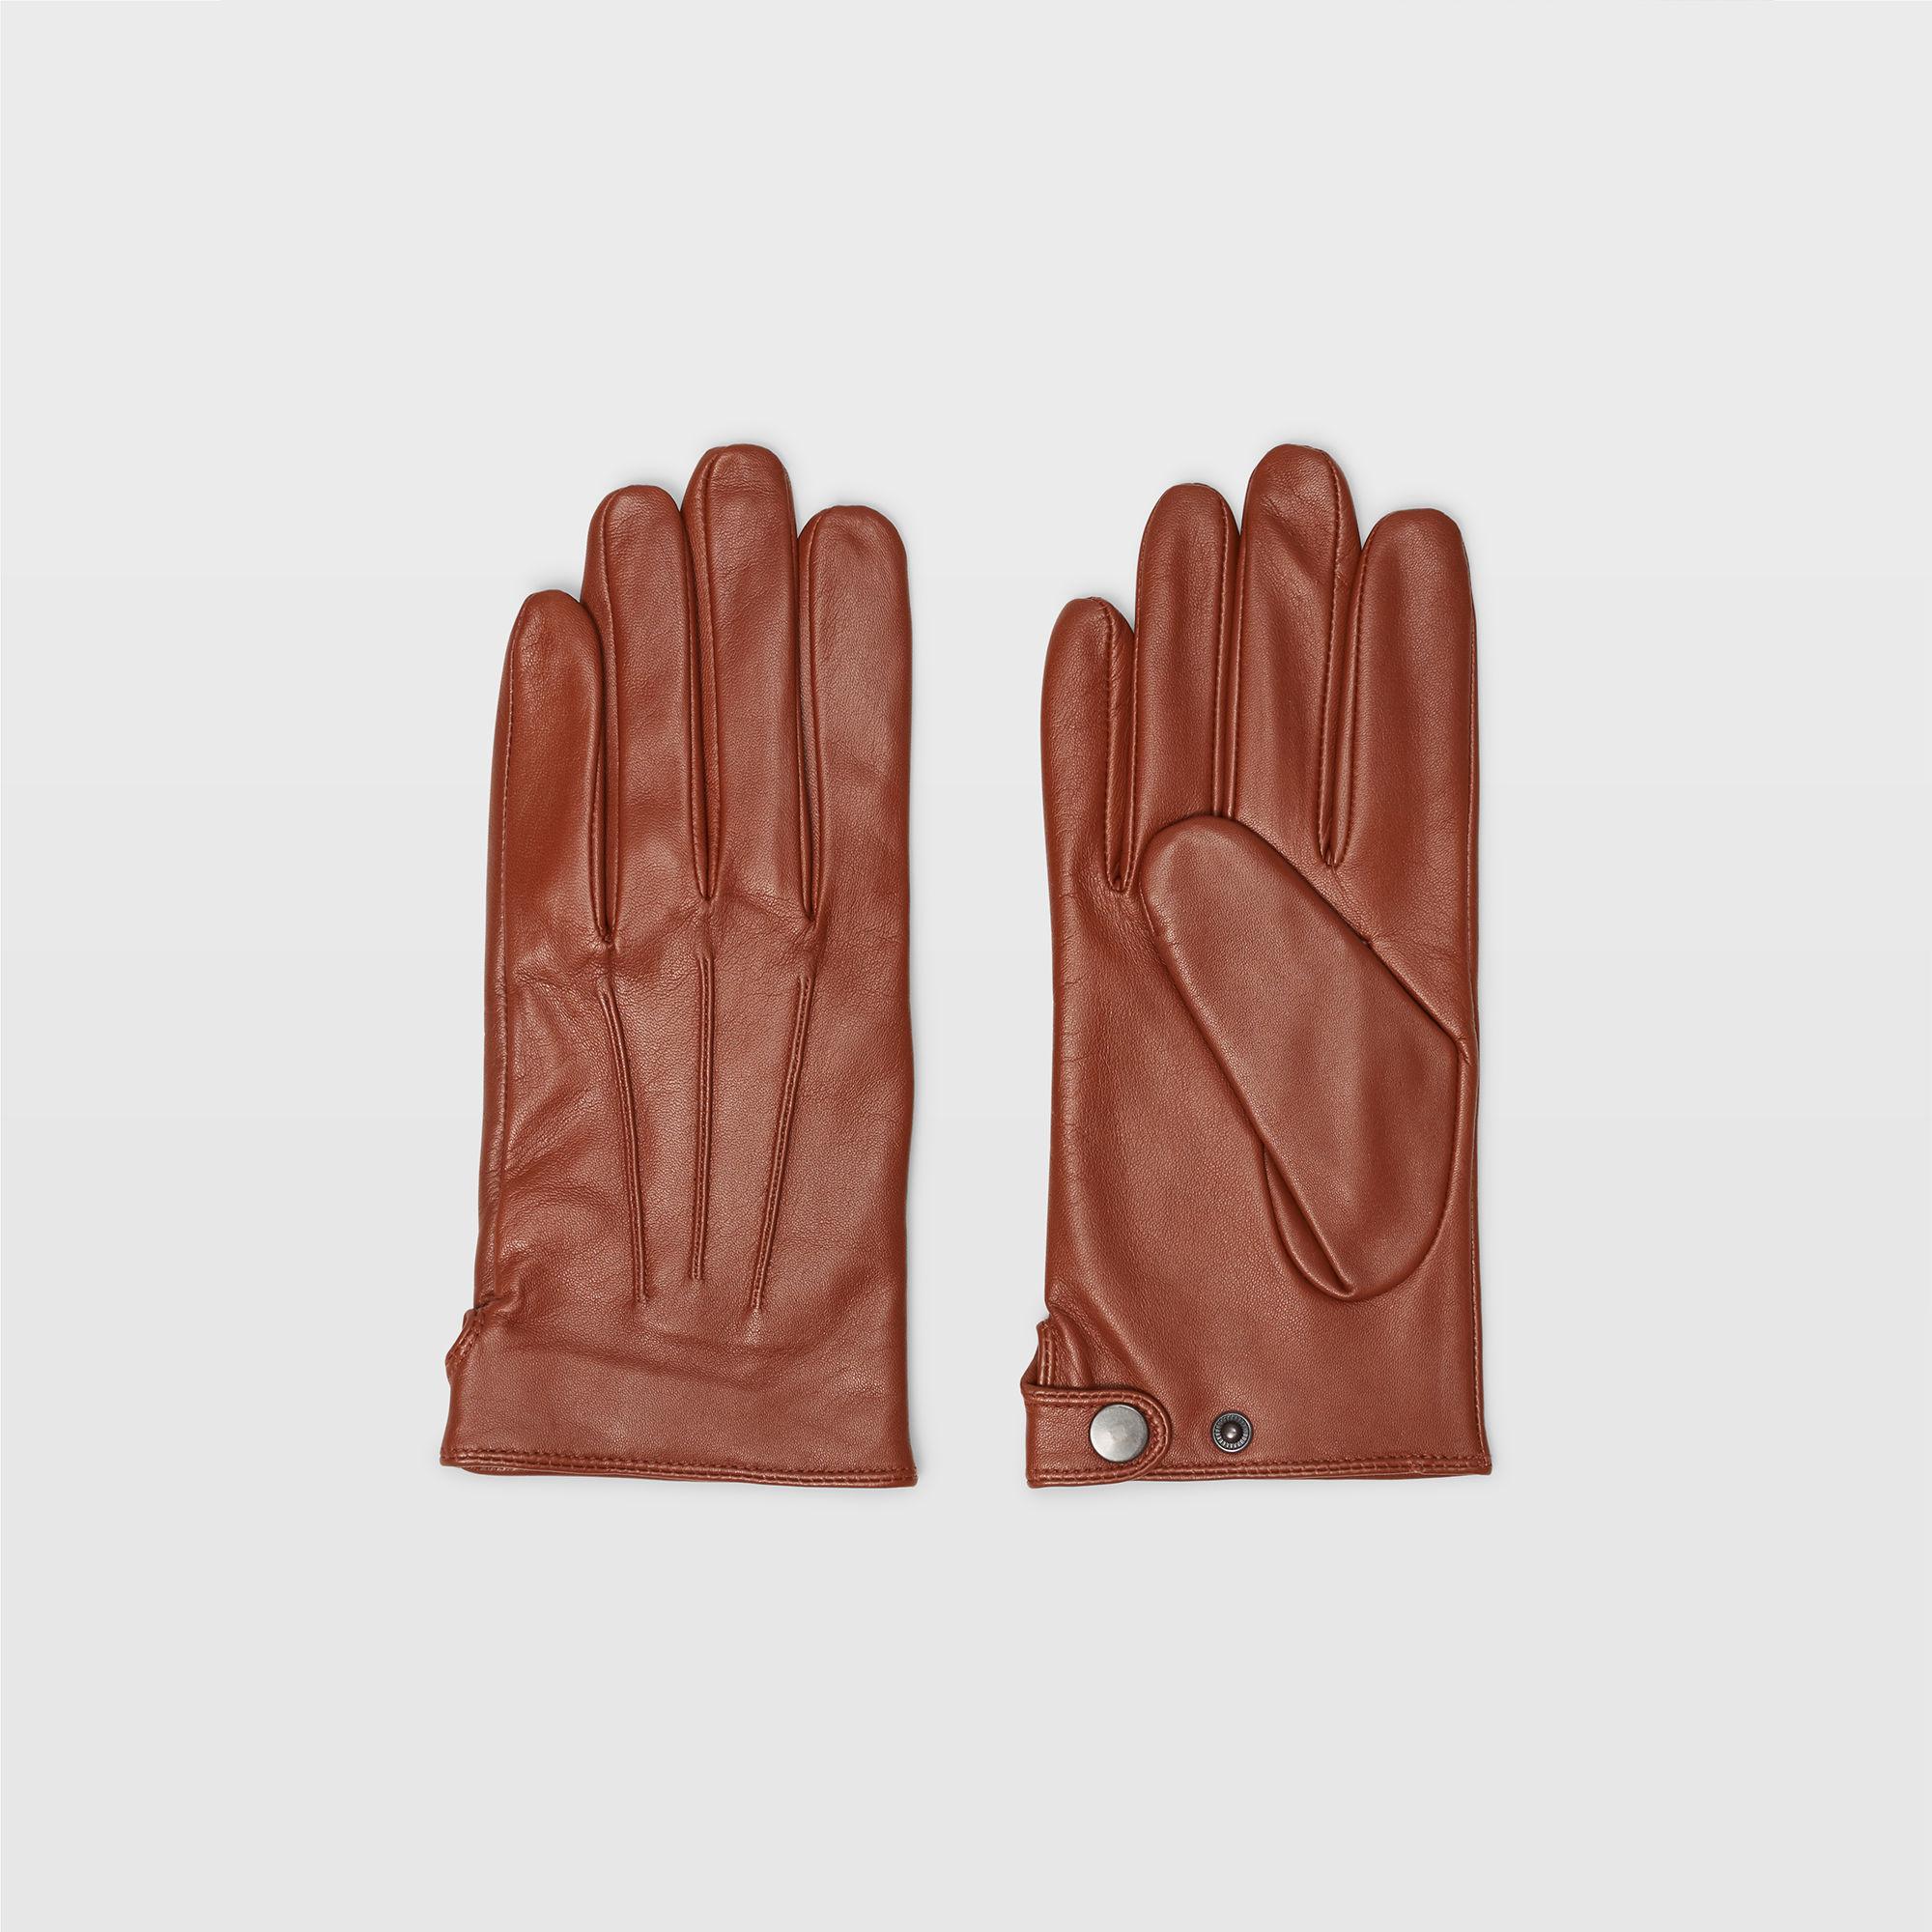 Club Monaco Leather Snap Glove in Brown for Men - Lyst